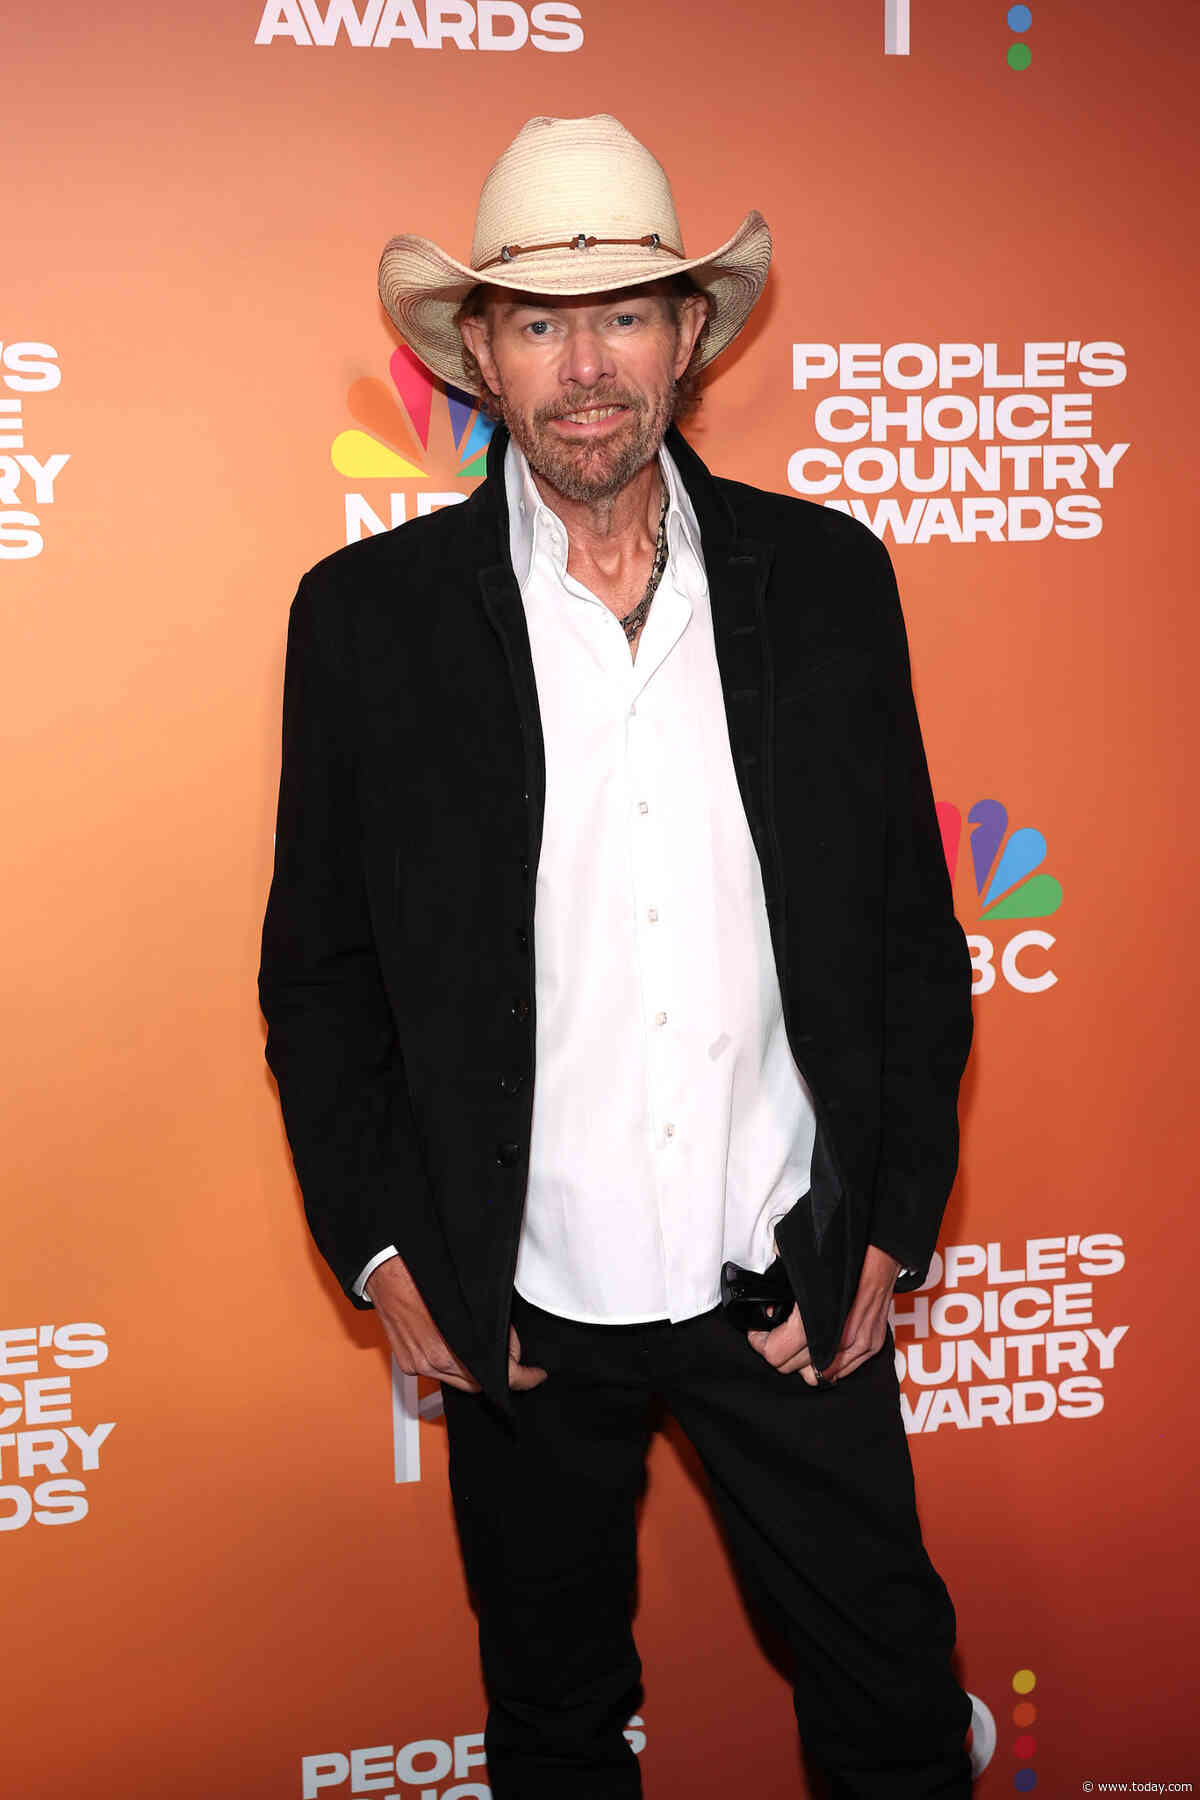 What Toby Keith said about his cancer battle at the People’s Choice Country Awards